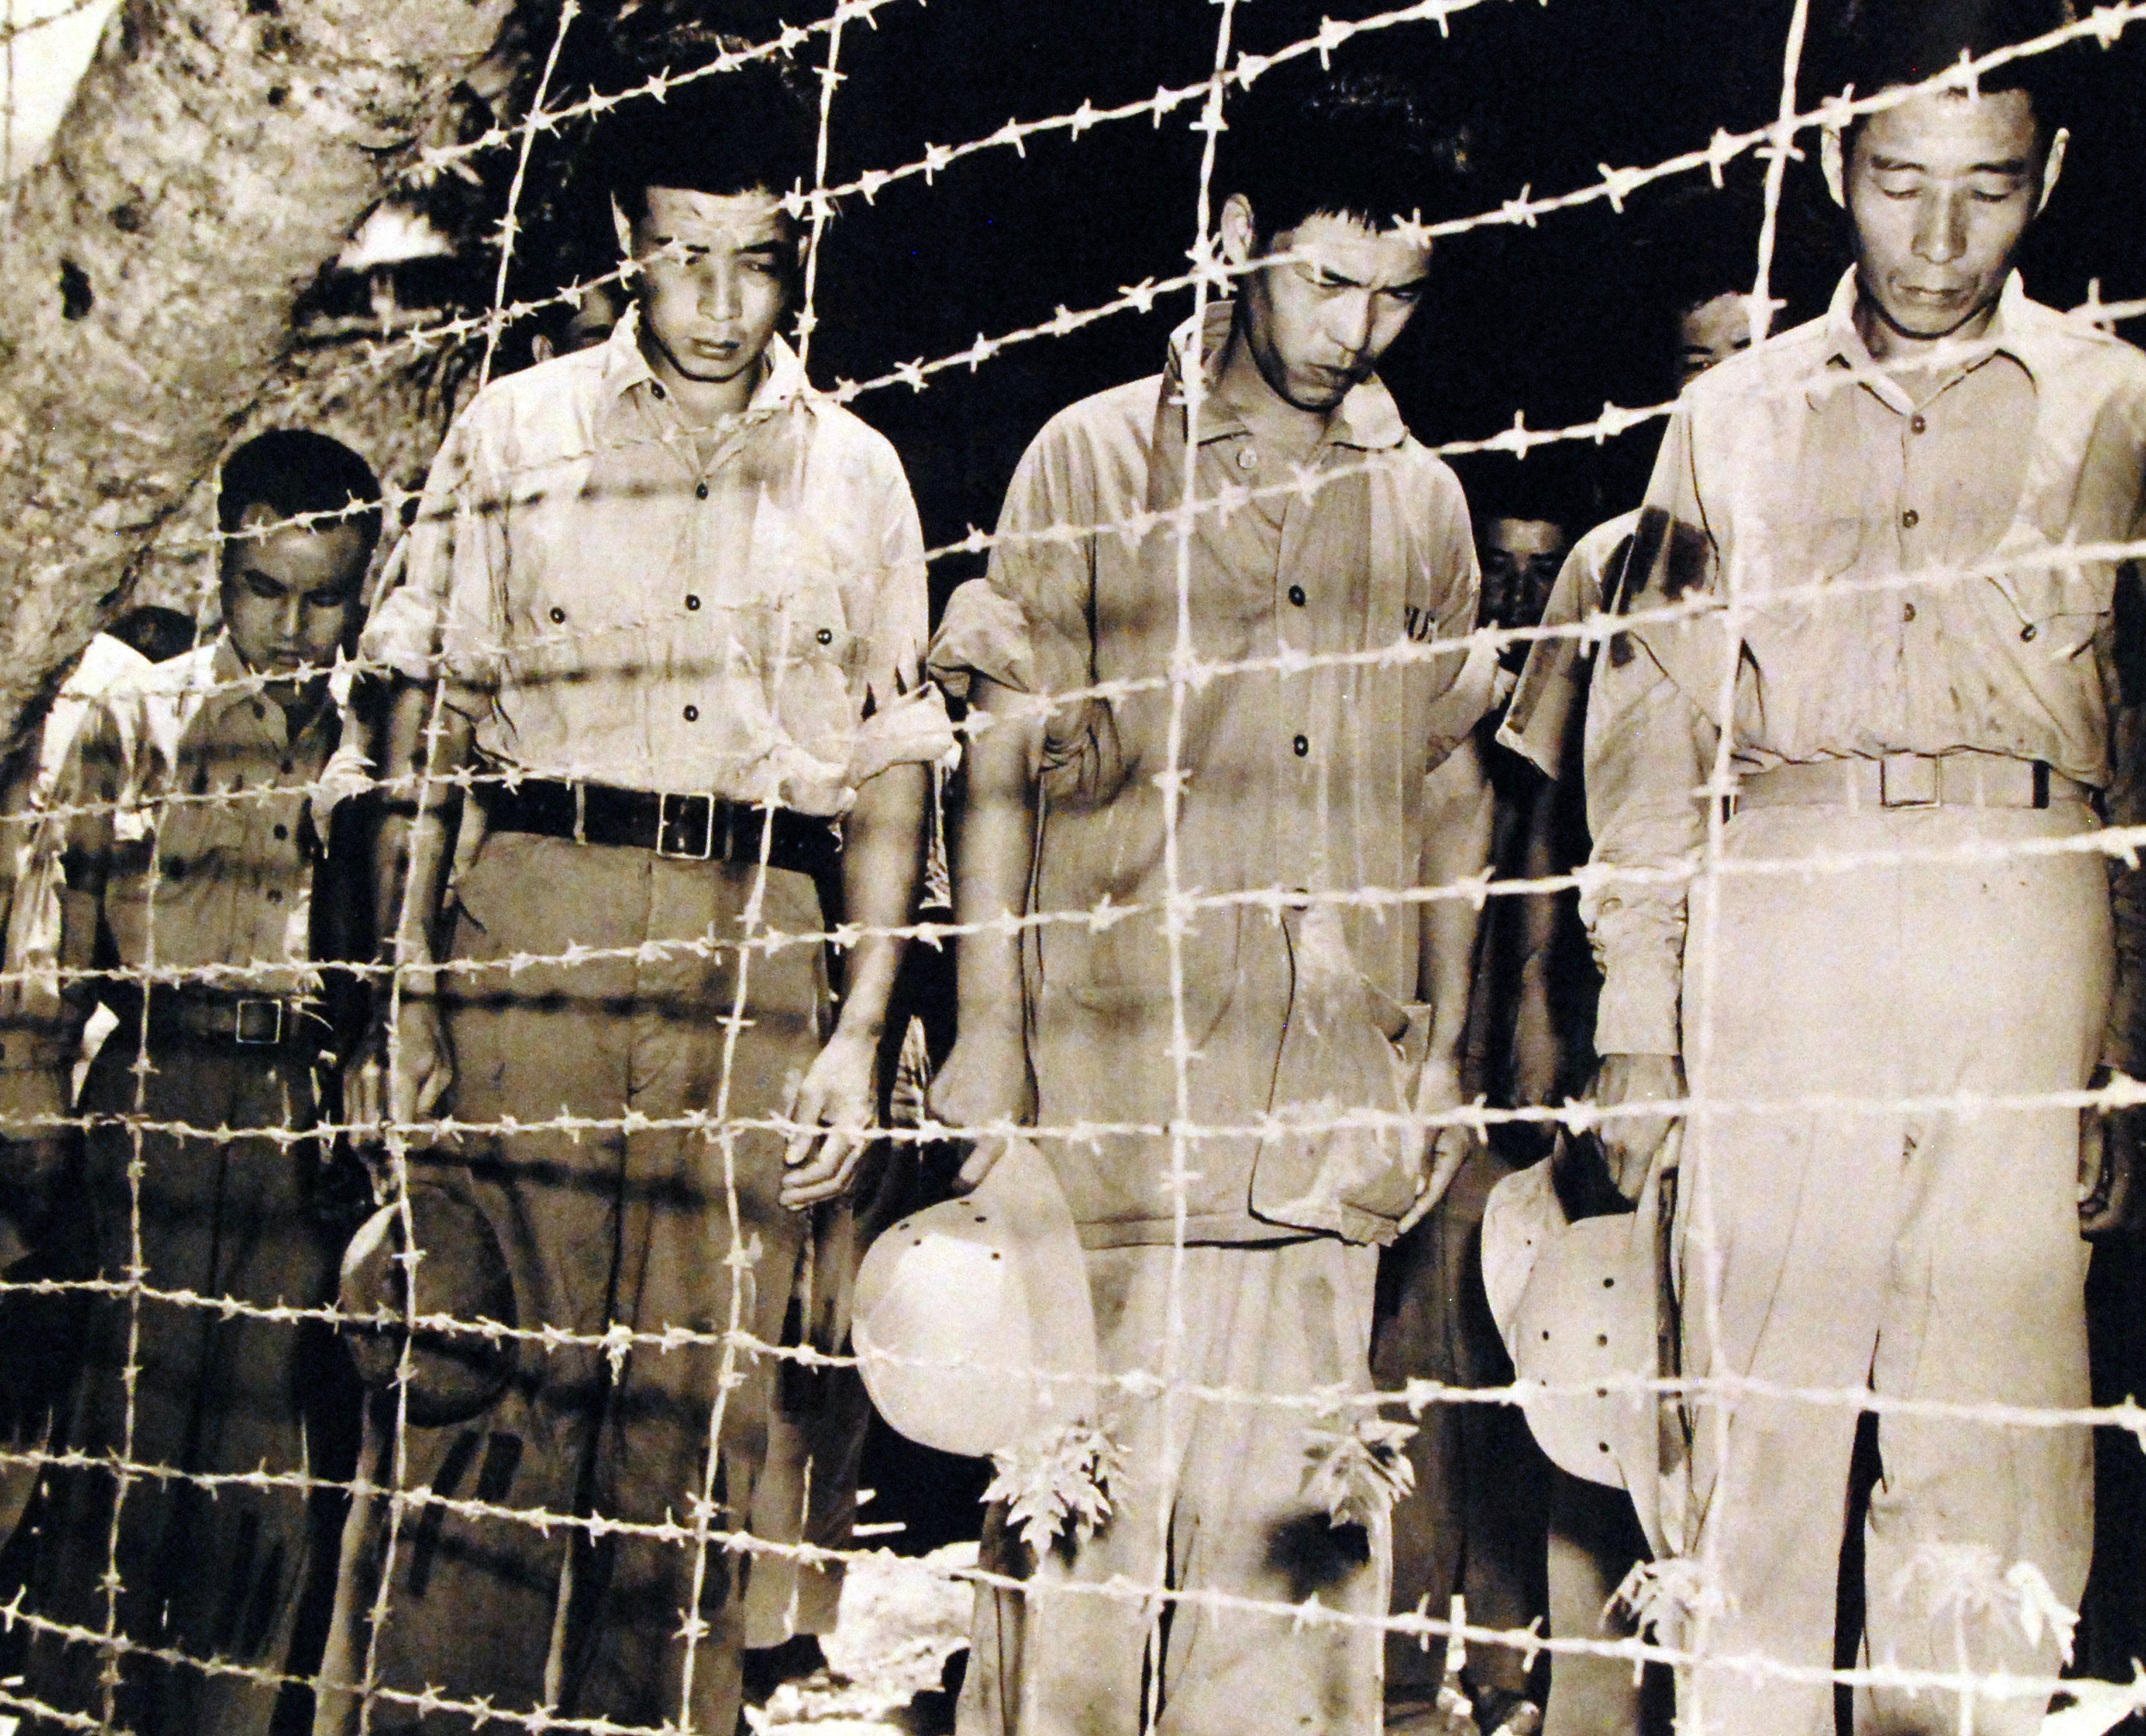 Japanese POWs at Guam bowed their heads after hearing Emperor Showa's surrender announcement, 15 Aug 1945, photo 2 of 2